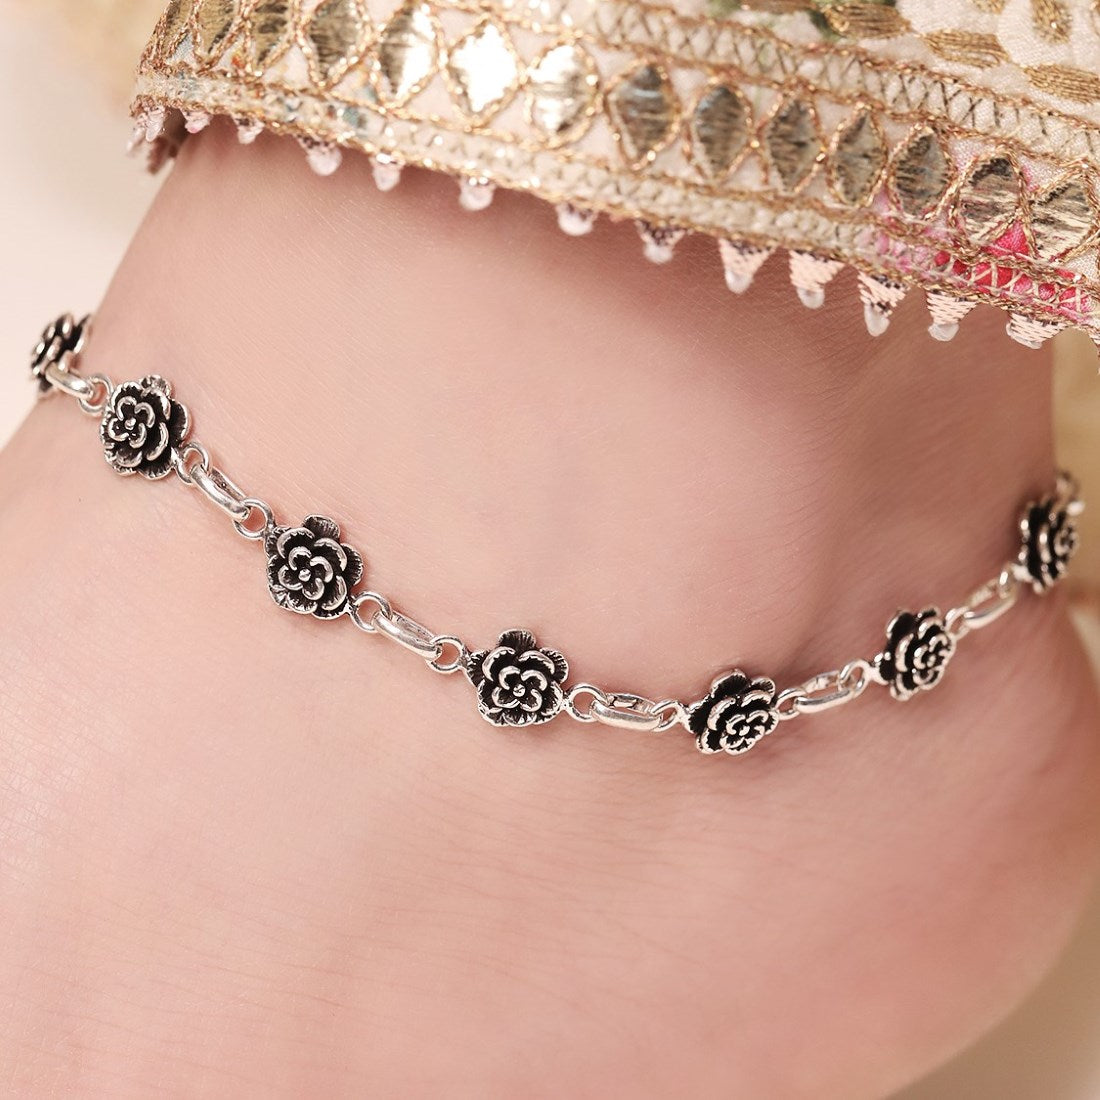 Floral Whimsy Delight Rhodium-Plated 925 Sterling Silver Anklet